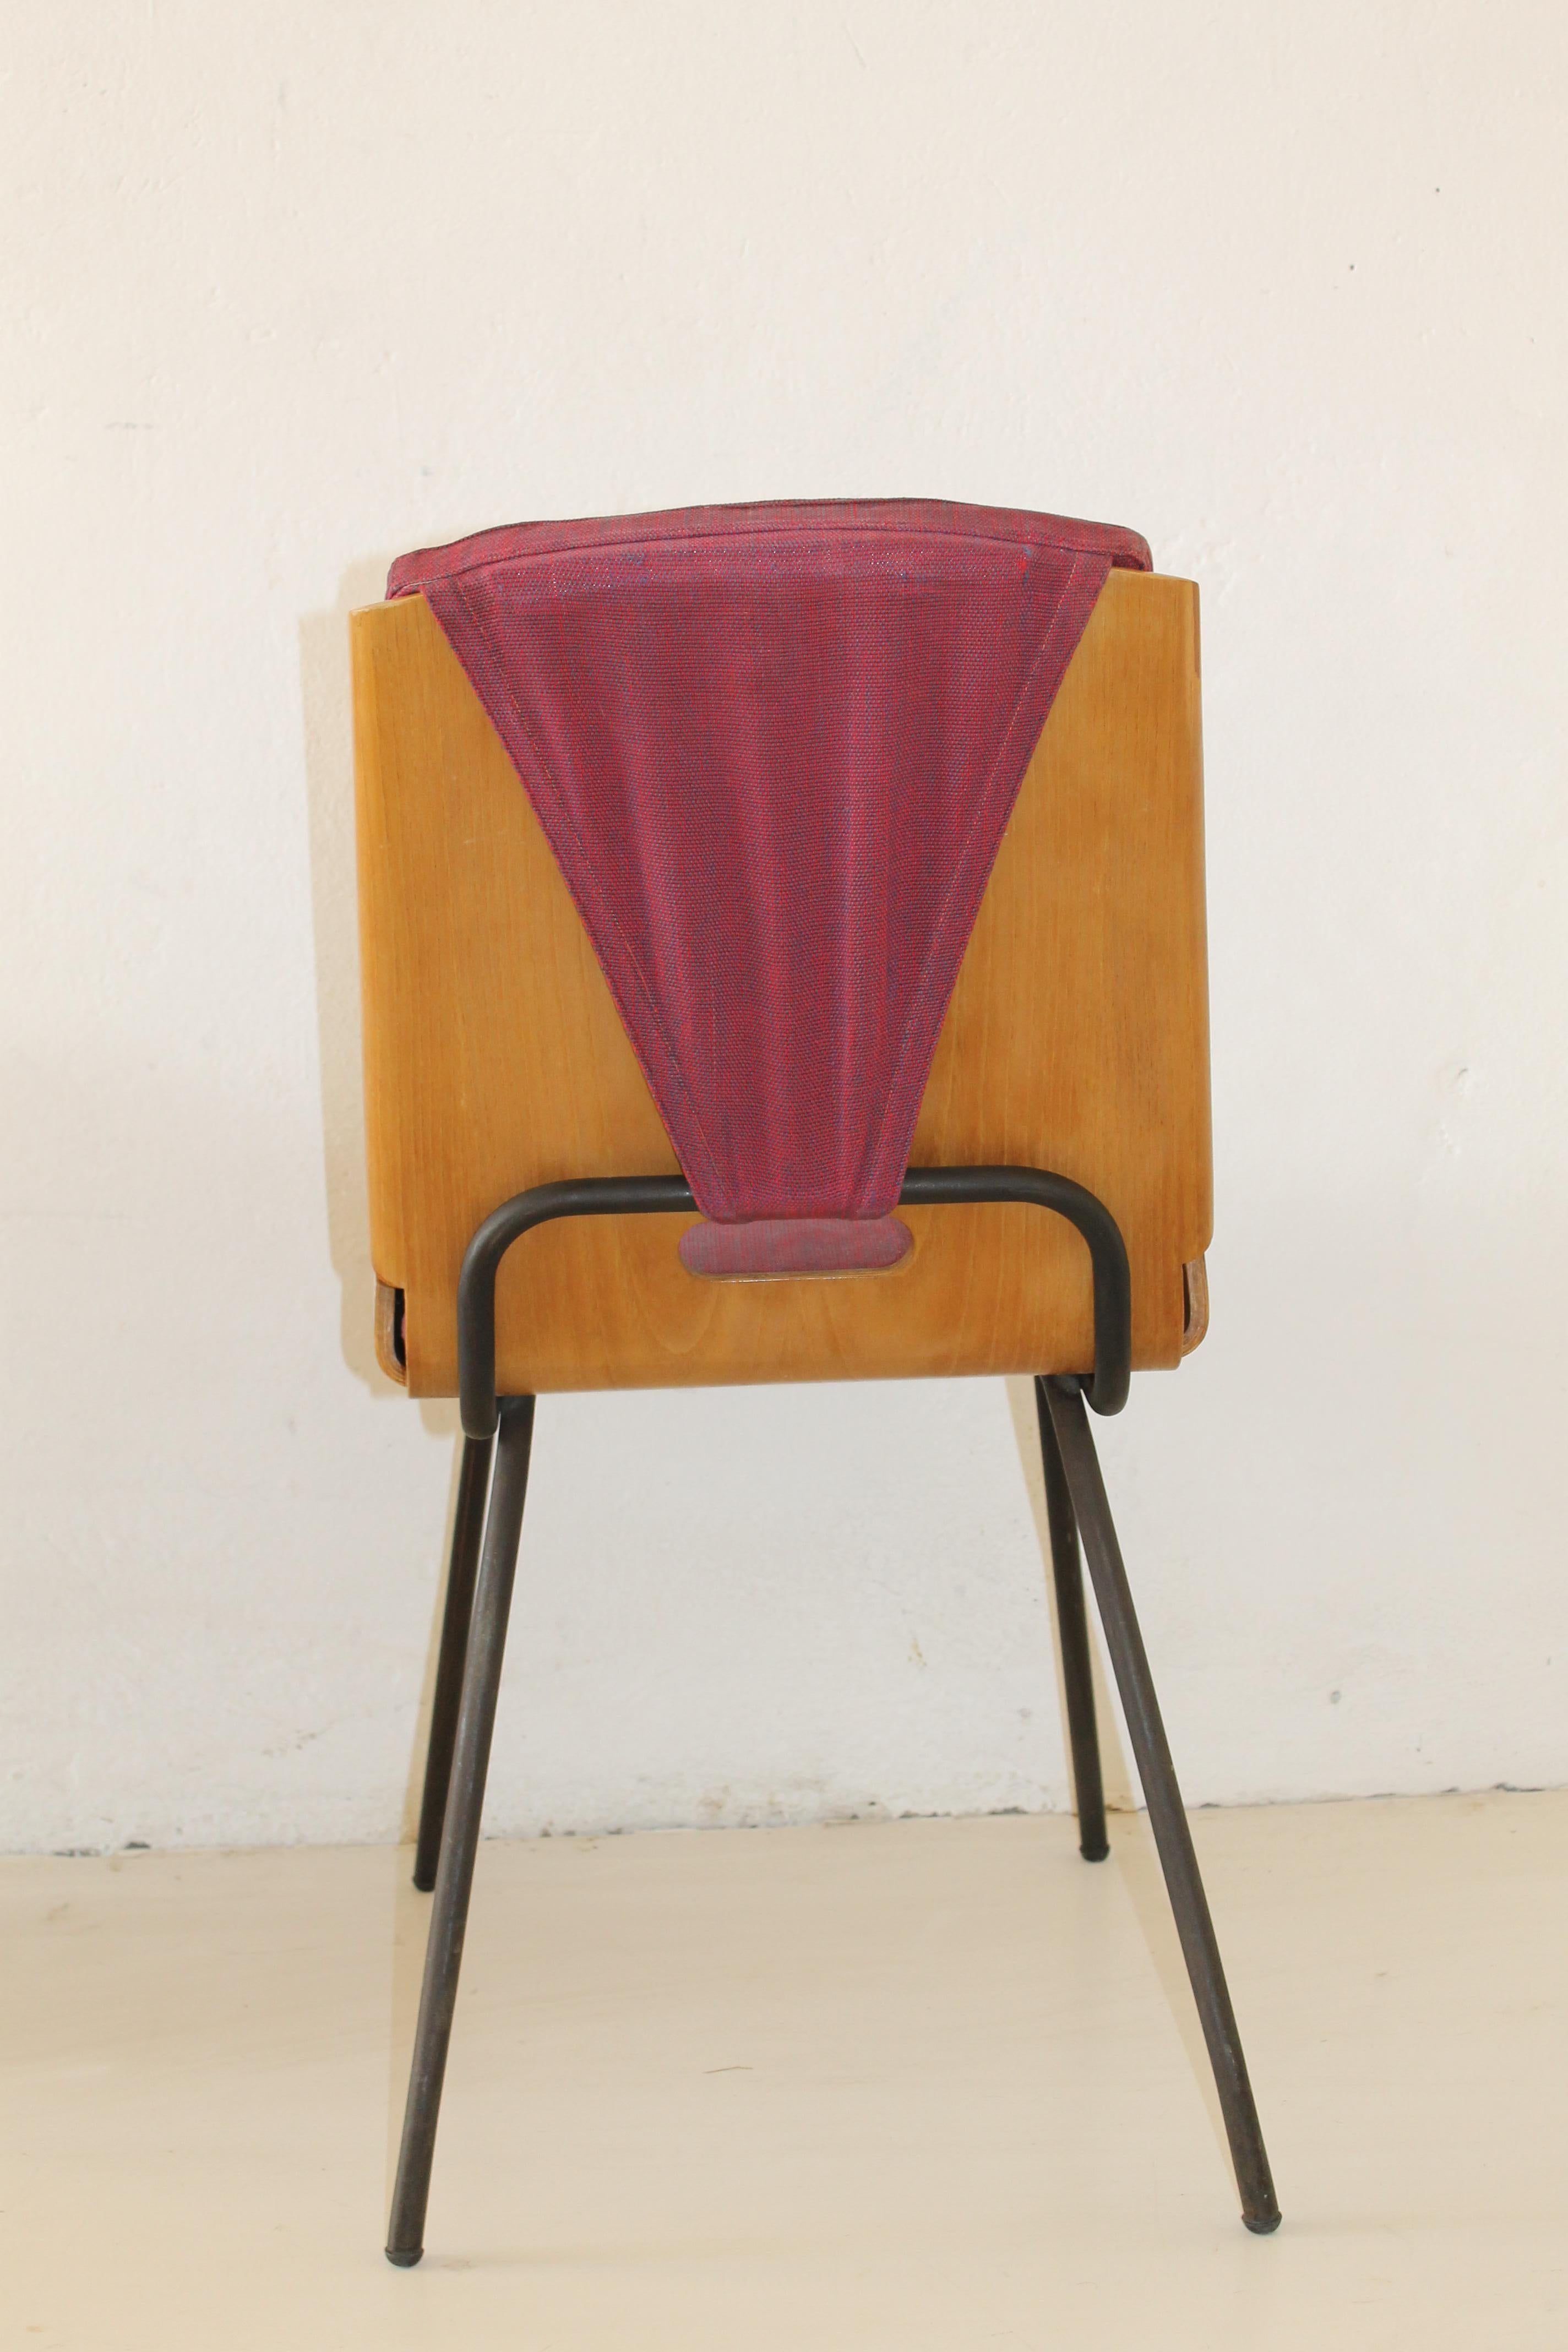 Chair designed by Giancarlo De Carlo, manufactured by Arflex, Italy, 1954. This chair is an original commission for the furnishings of the motor yacht 